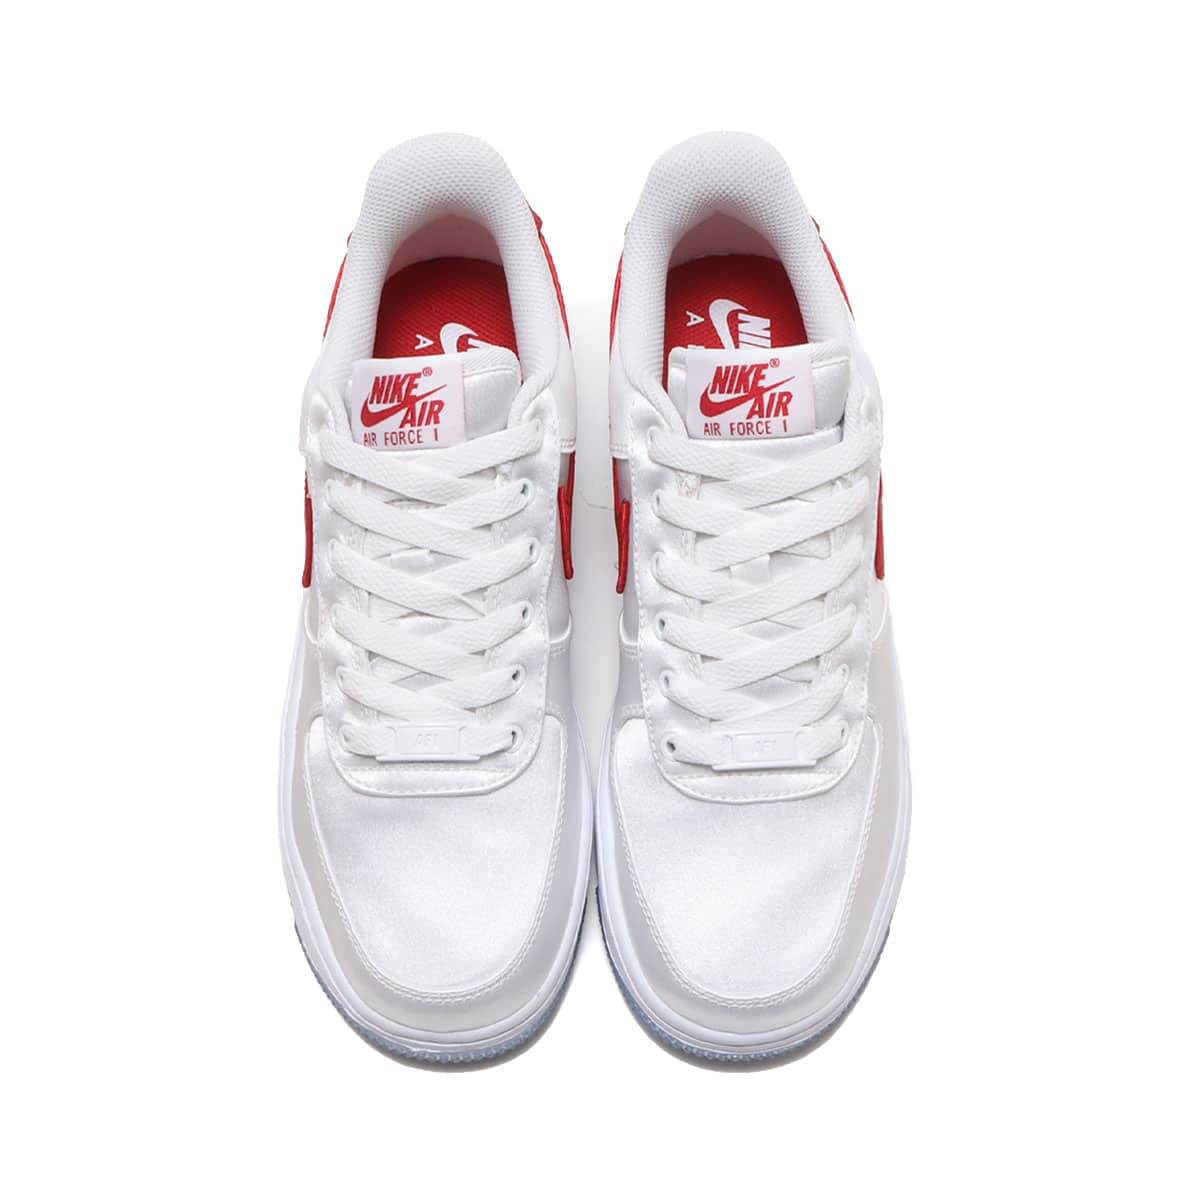 NIKE W AIR FORCE 1 '07 ESS SNKR WHITE/VARSITY RED 23SU-I